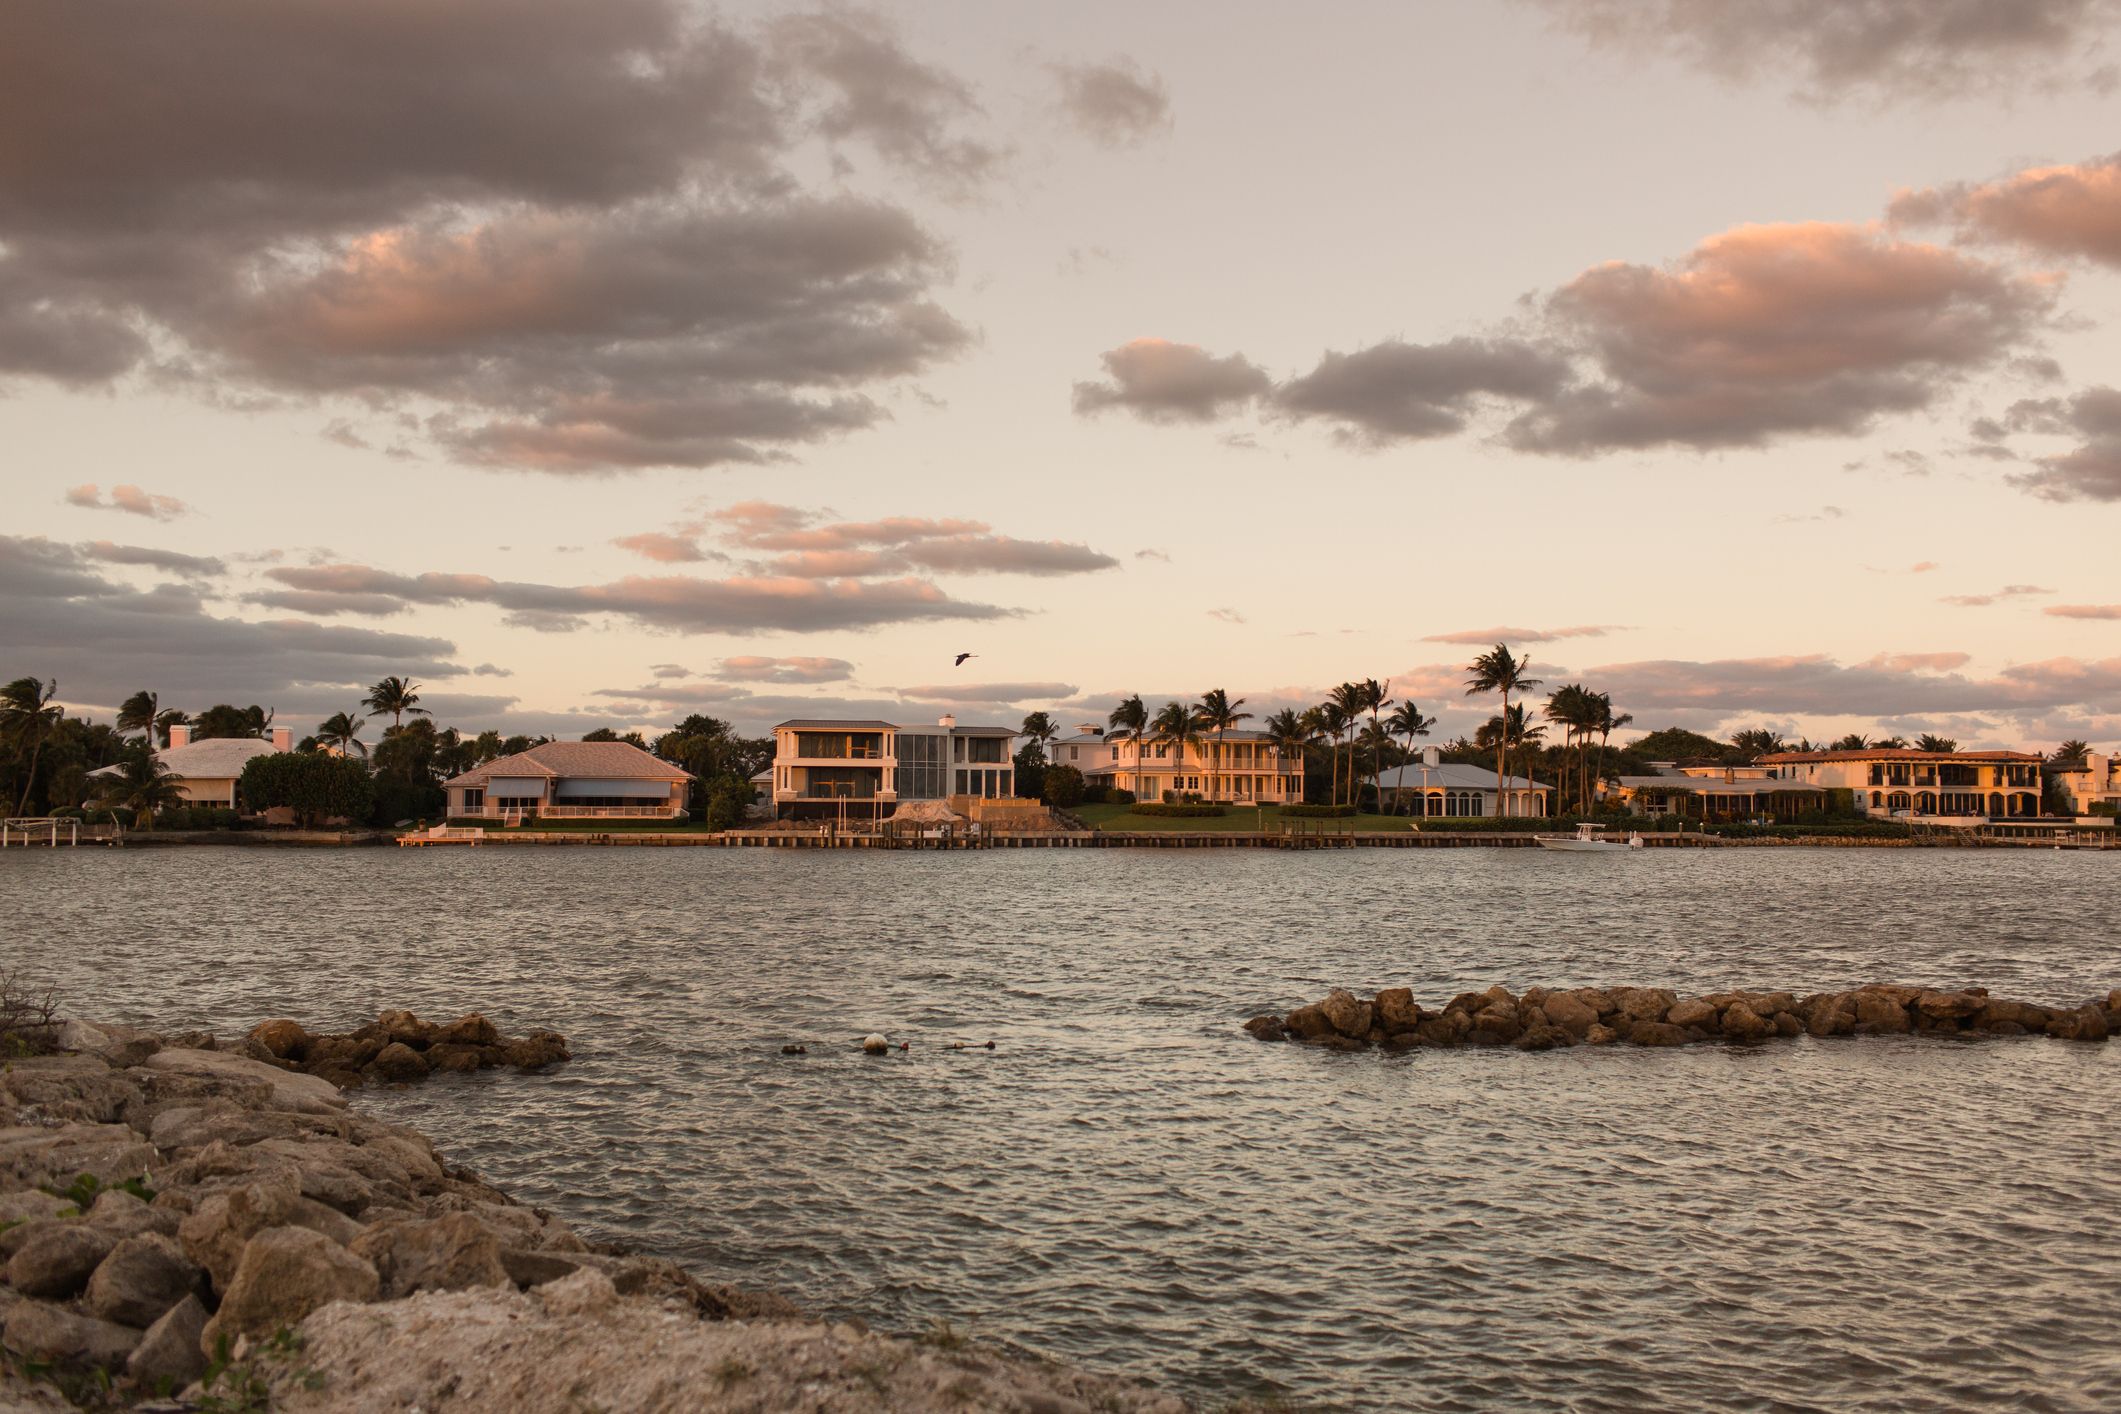 Tropical palm trees and ocean views at sunset in Jupiter Island.